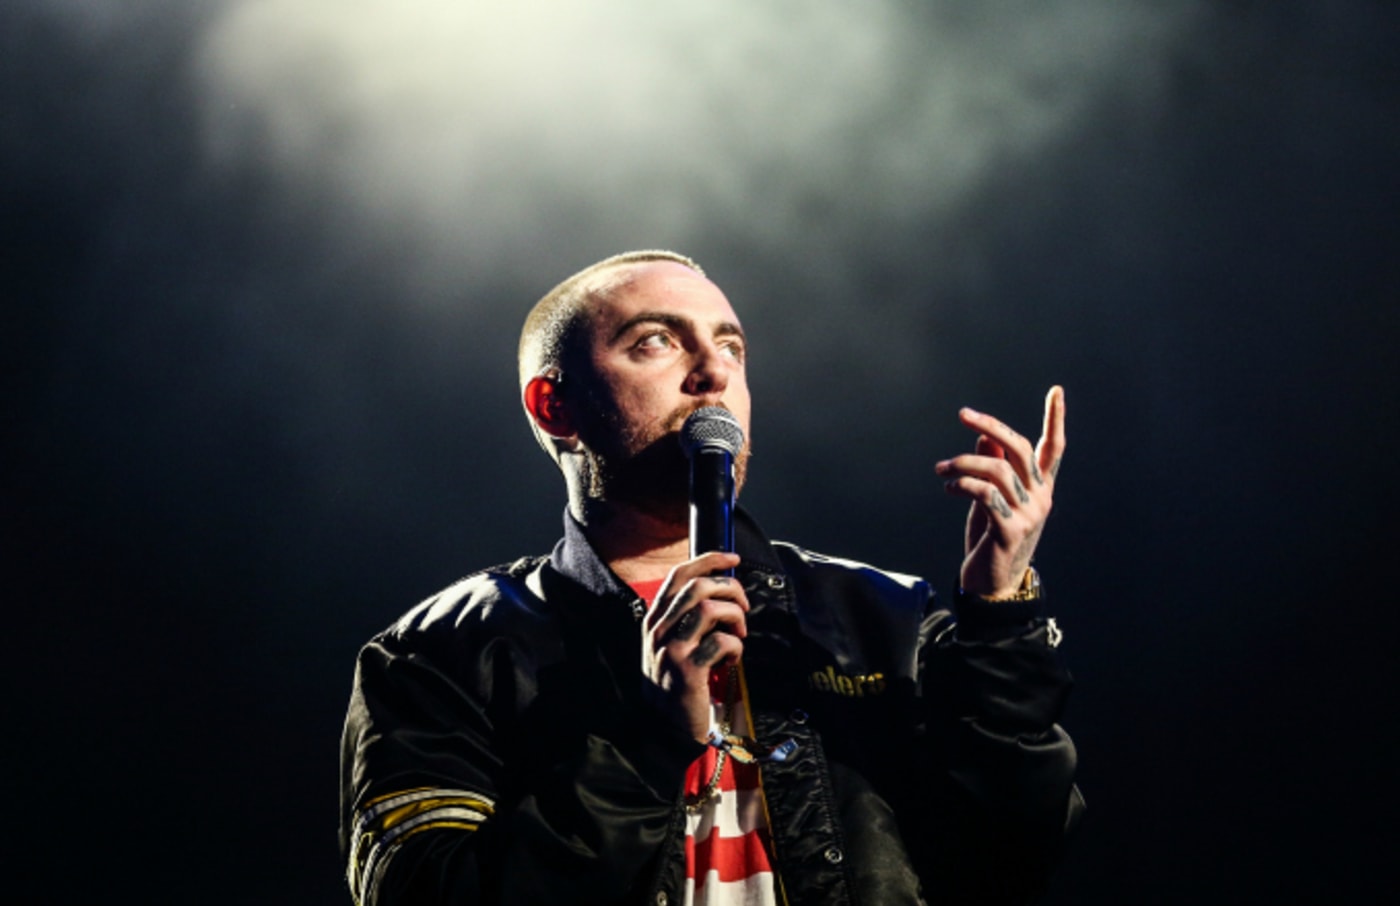 Mac Miller performs on the Camp Stage during day 1 of Camp Flog Gnaw Carnival